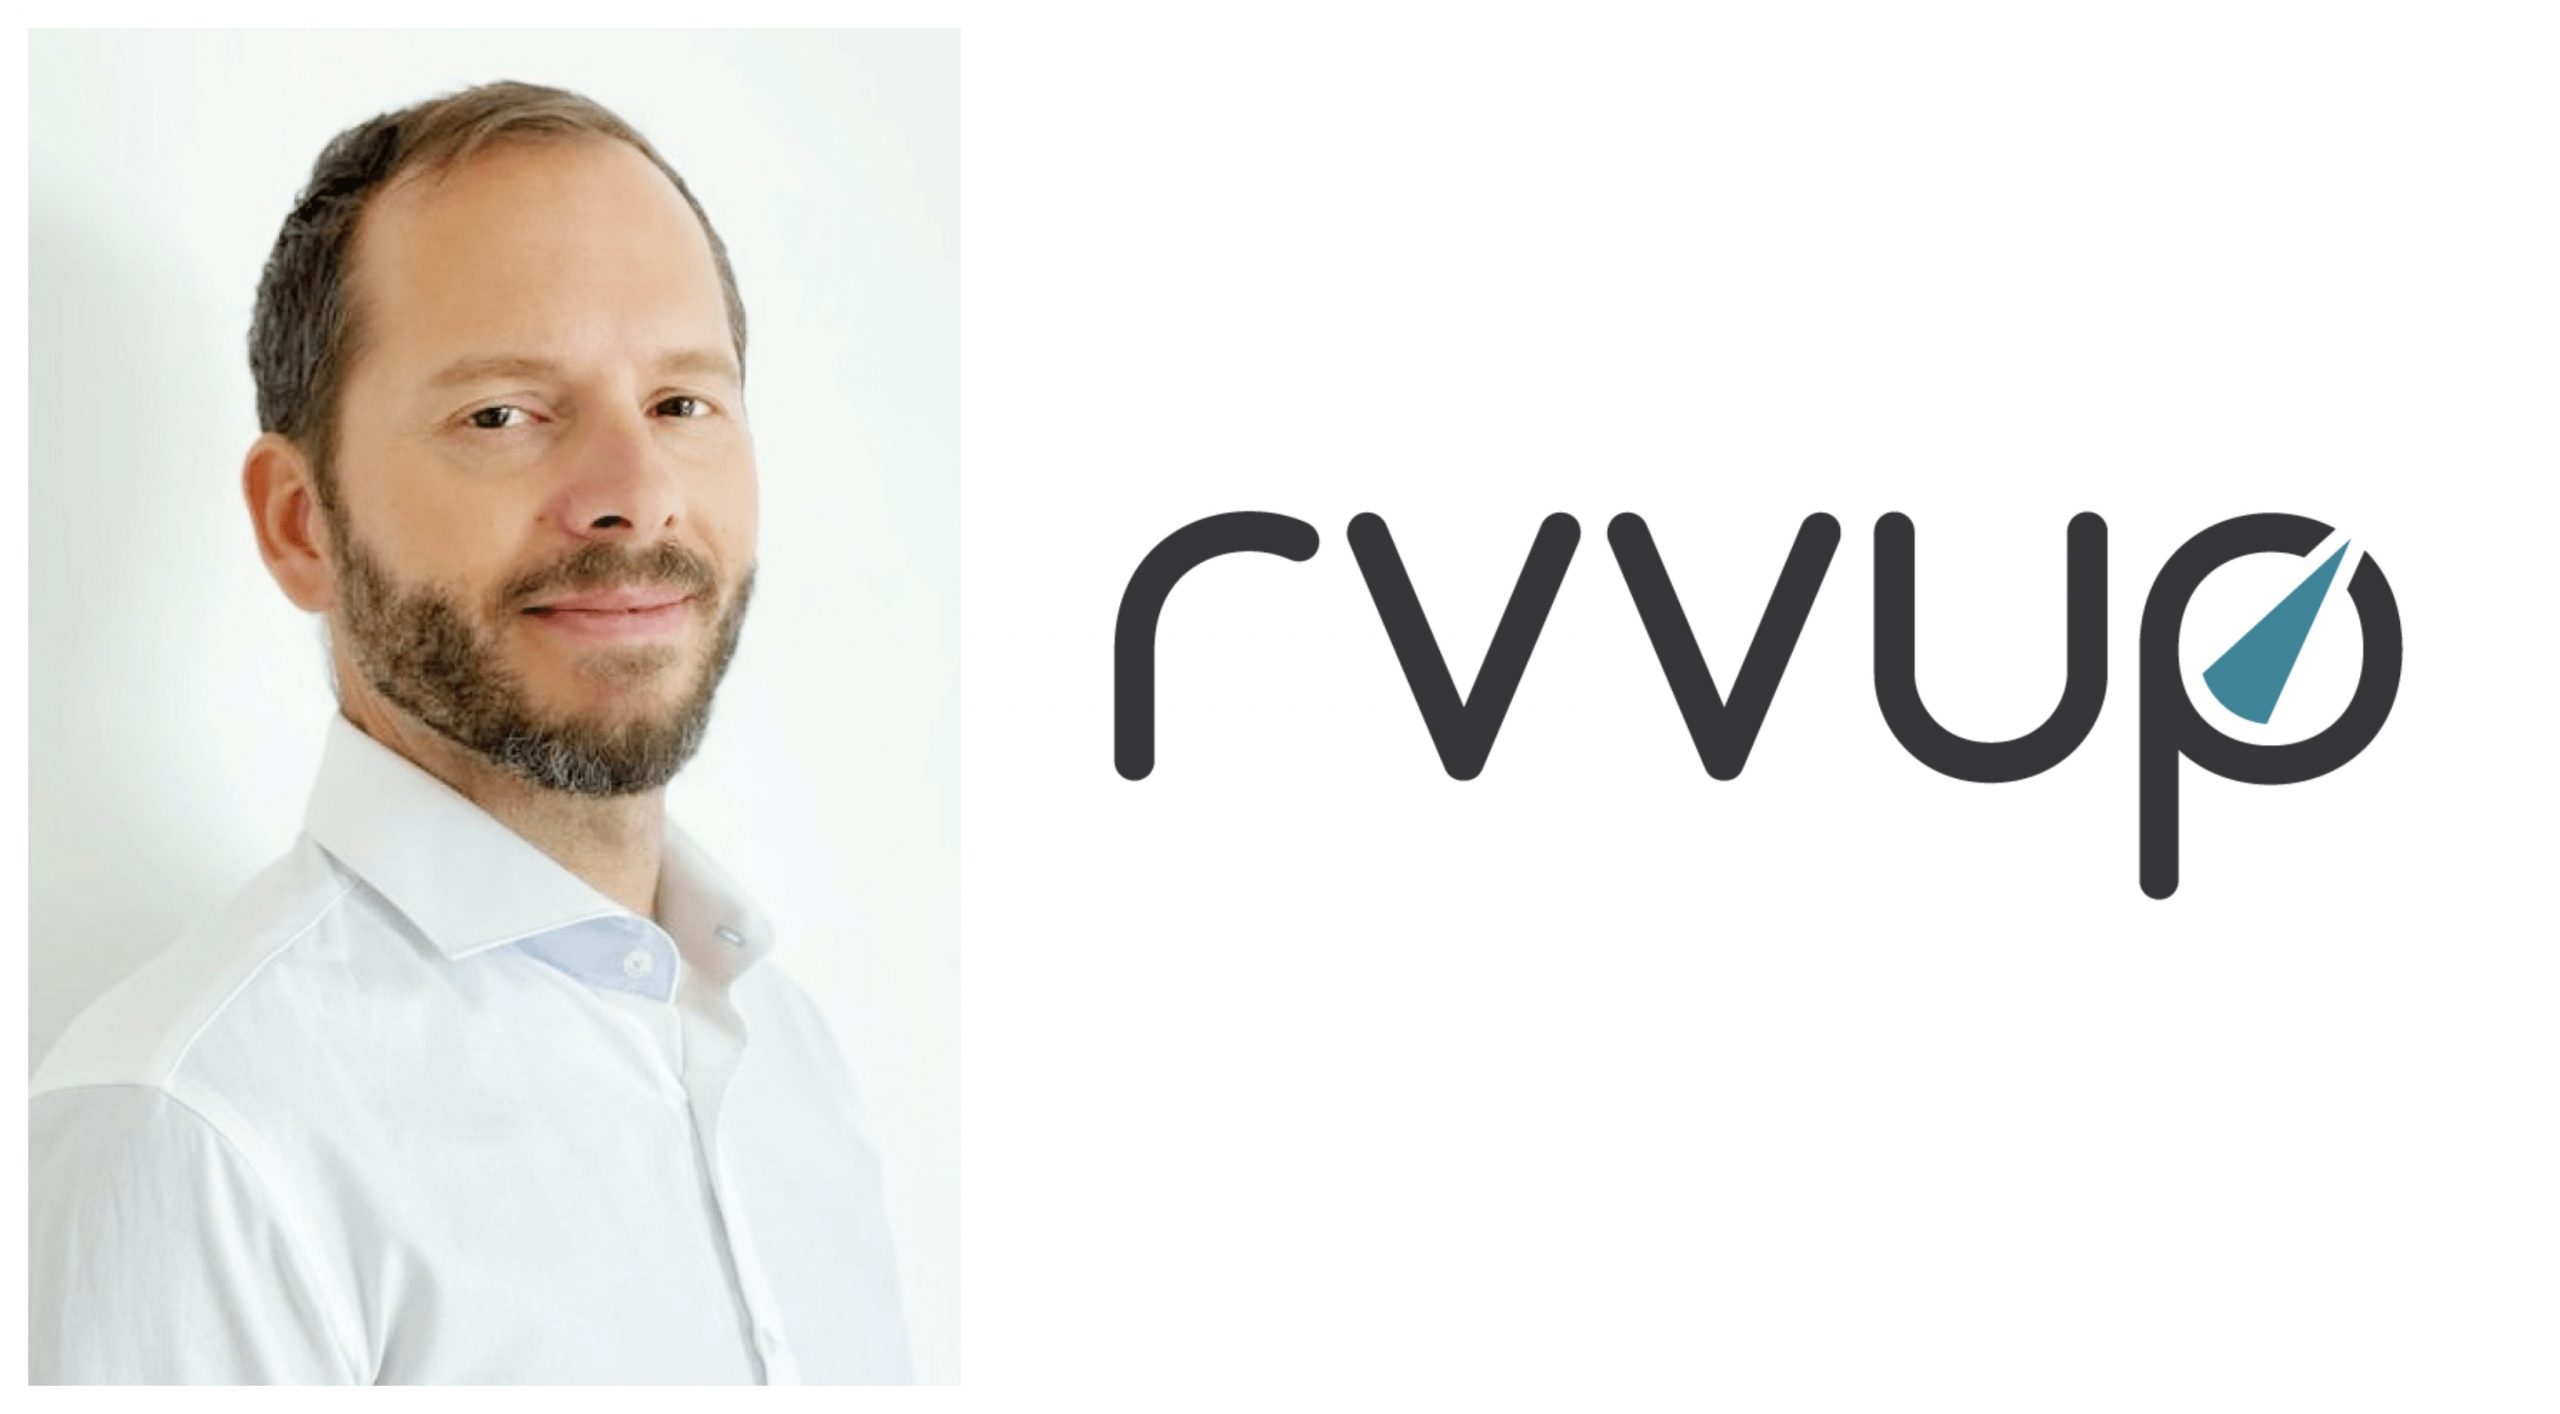 Rvvup secures £5.6 million Seed investment led by HV Capital and Lakestar